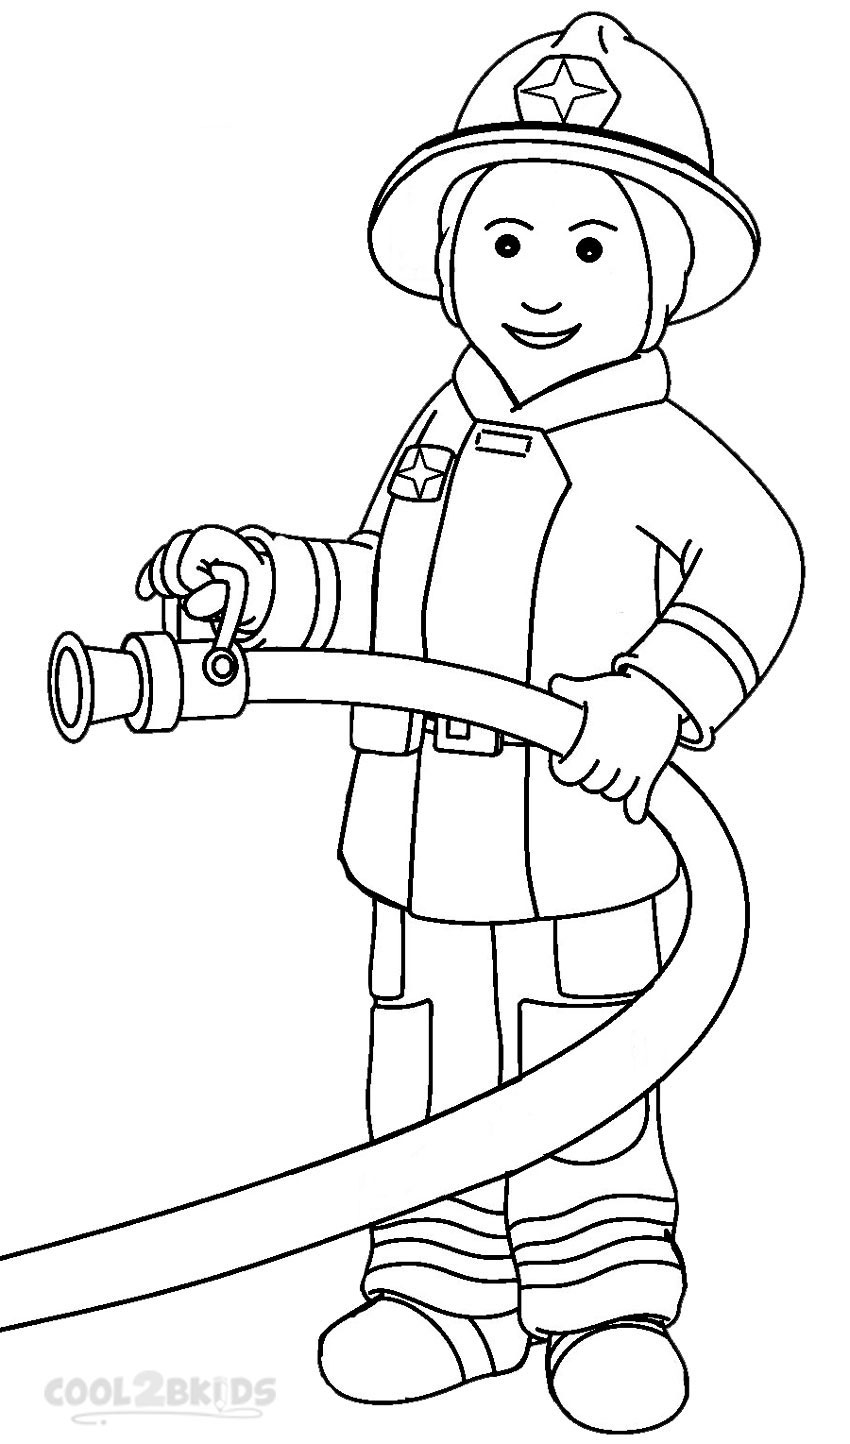 fireman and policeman coloring pages - photo #34